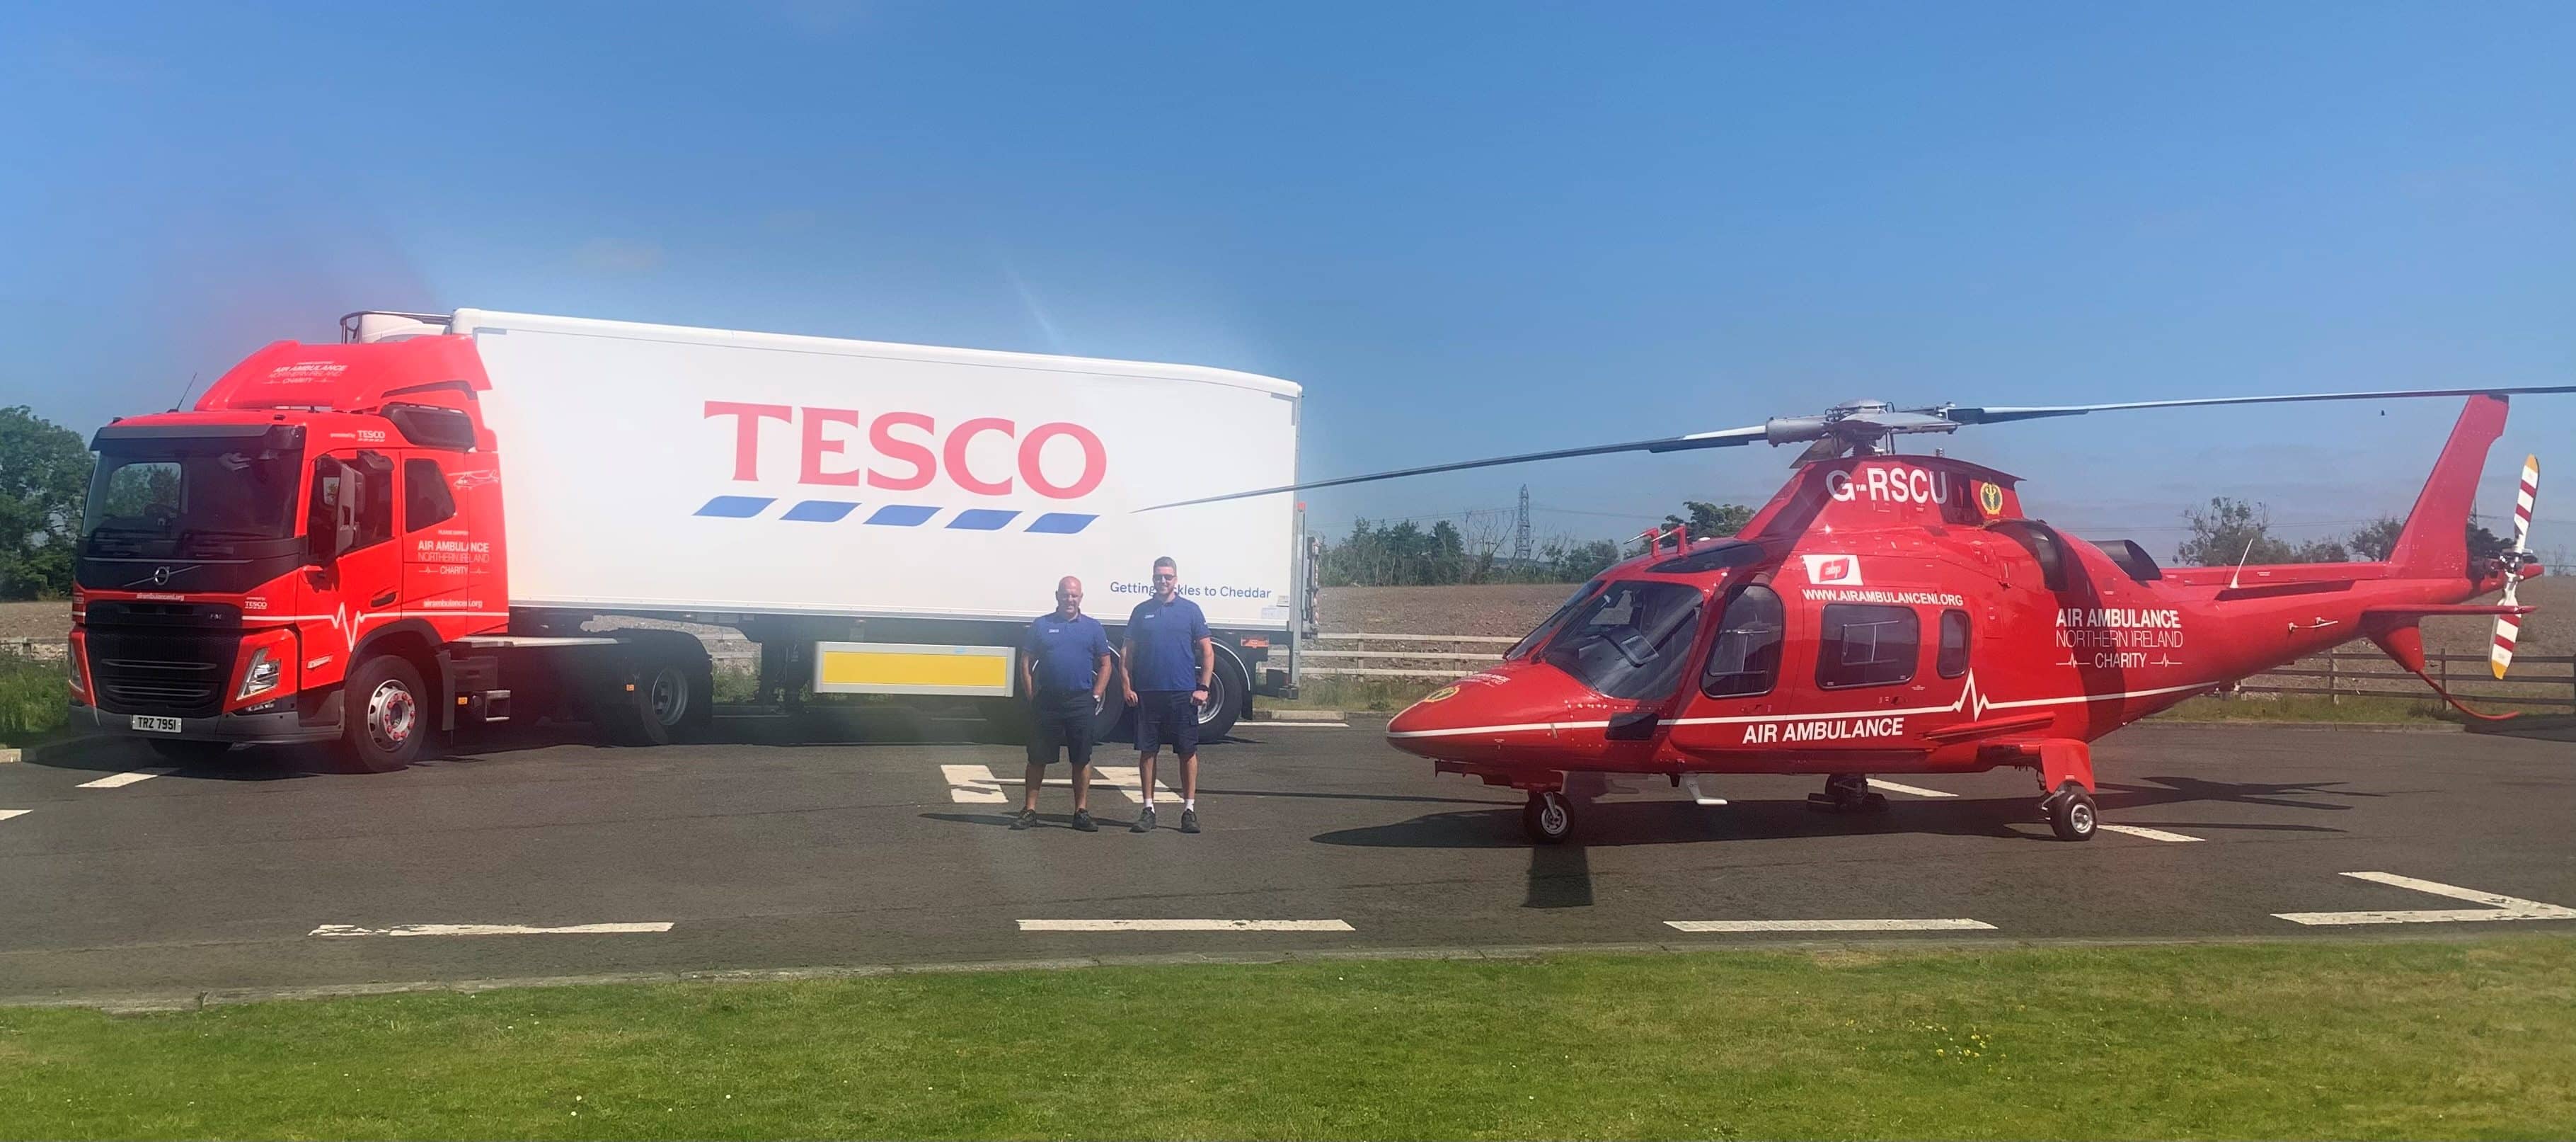  Tesco cab branded to encourage support of air ambulance charity